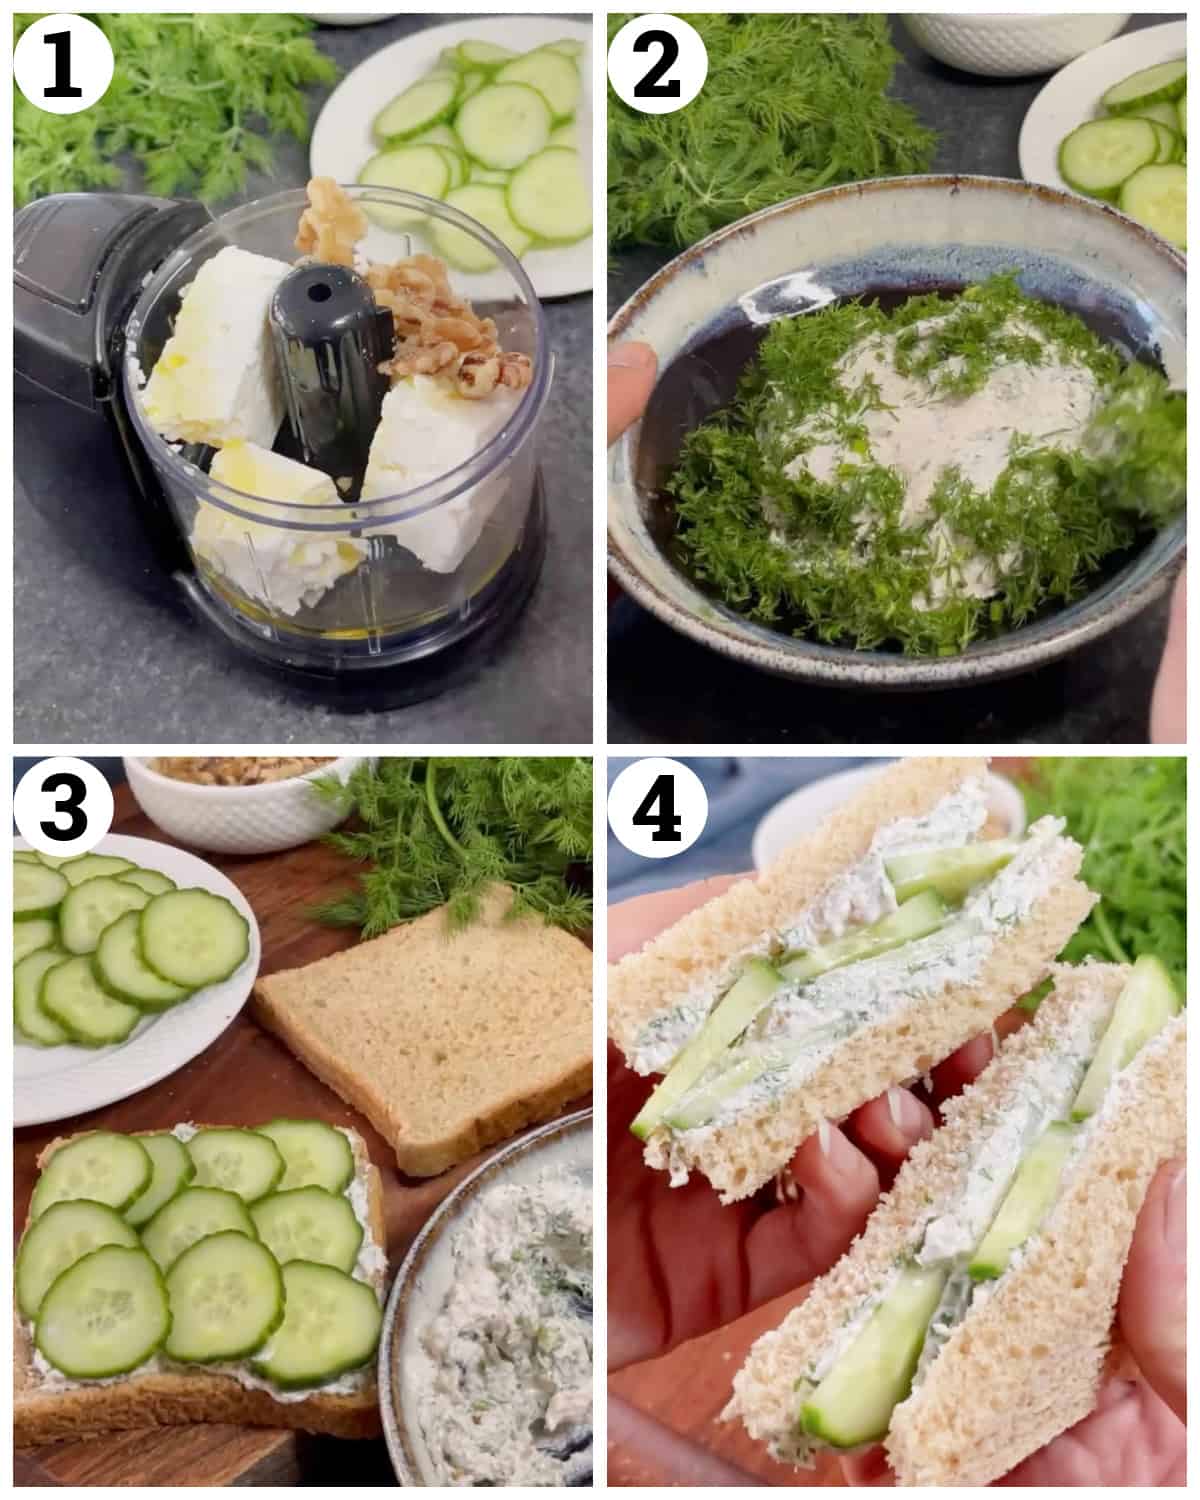 Mix the cheese and walnut with the herbs. Spread on bread slices and top with cucumbers and cut into triangles. 